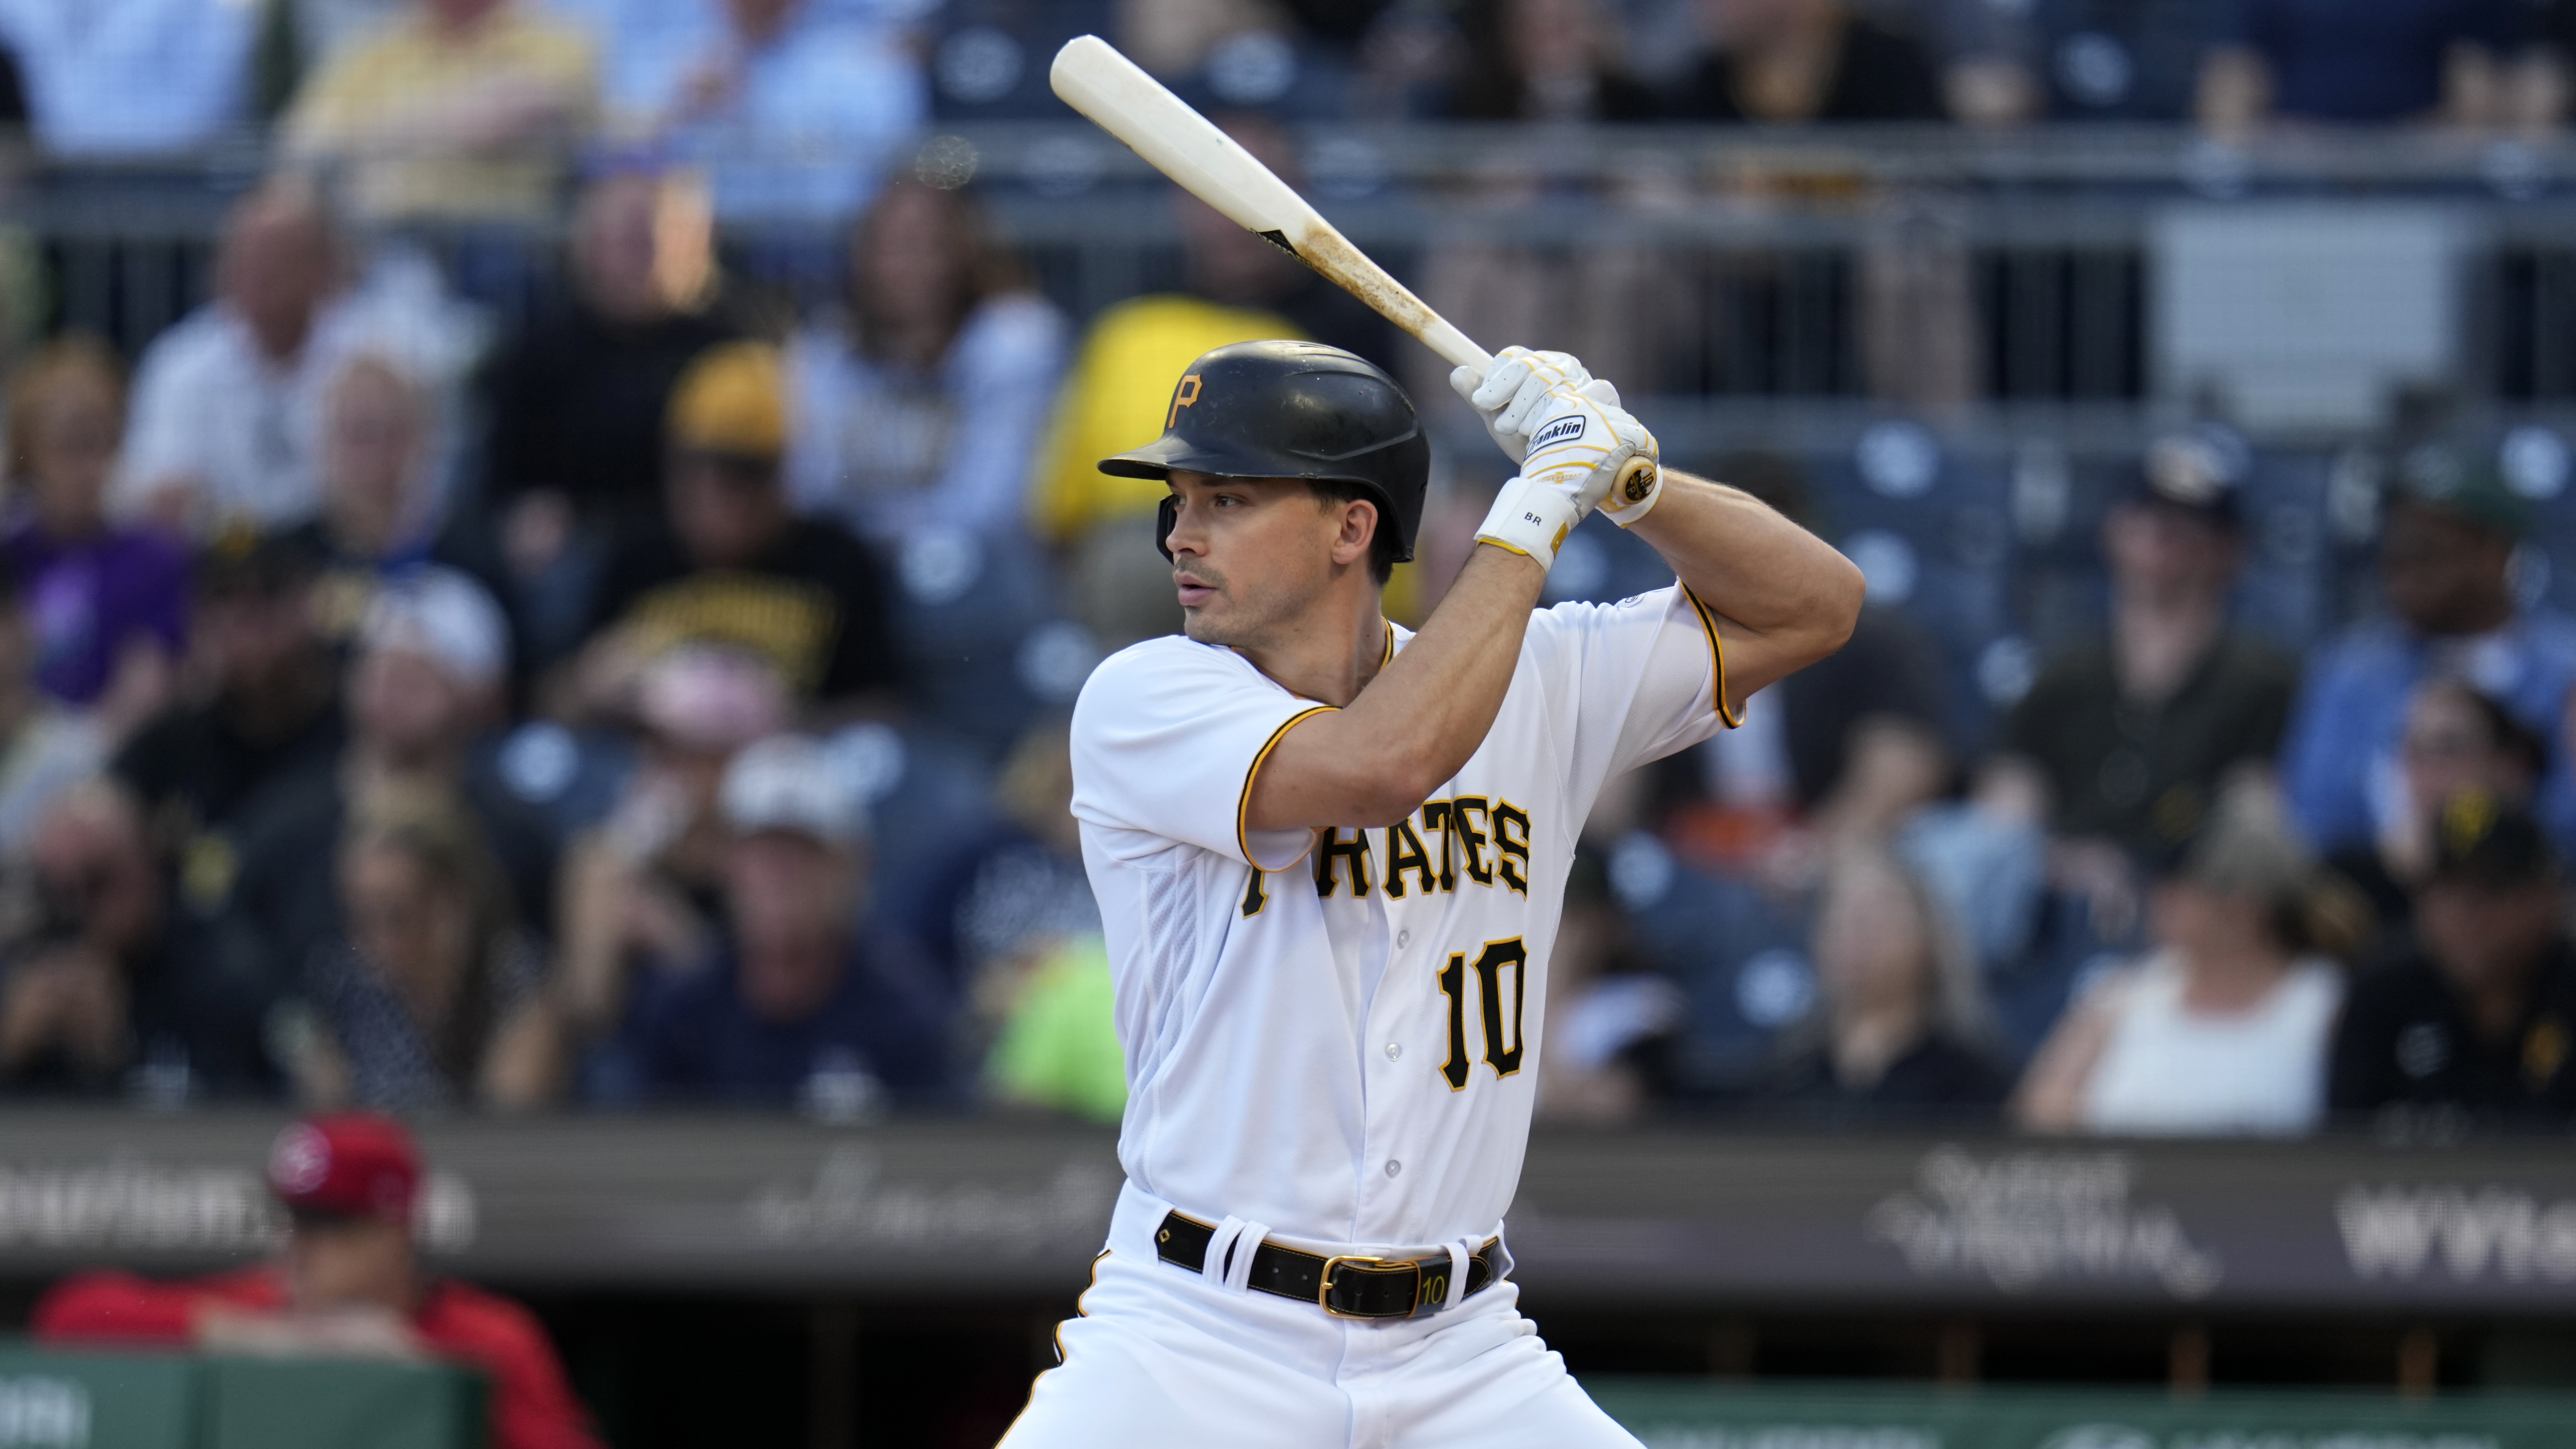 Pirates sign Bryan Reynolds to two-year contract, but All-Star